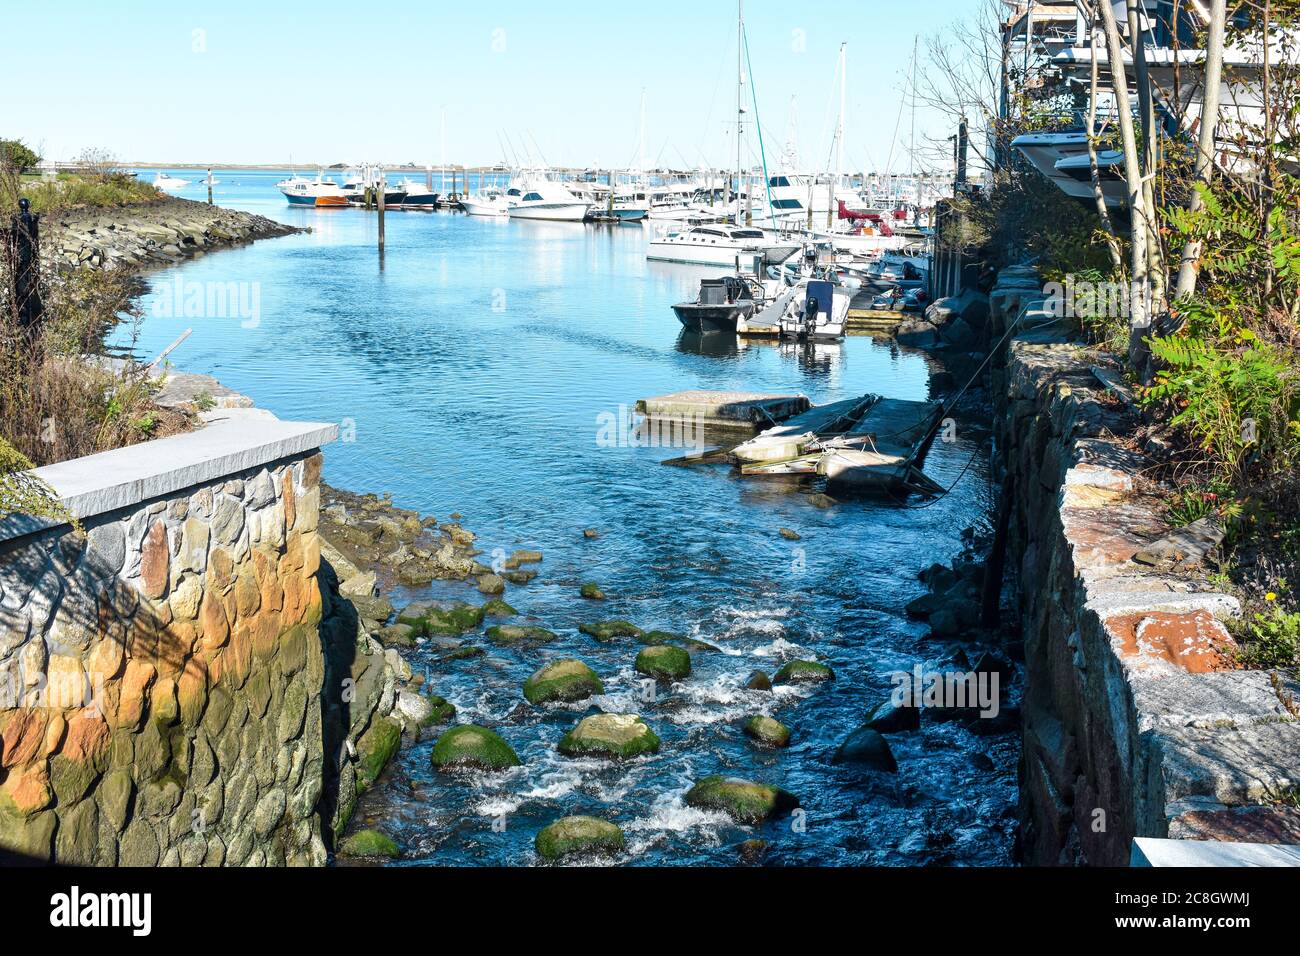 Town Brook flowing over rocks into Pymouth Harbor near boats at the Plymouth Marina Stock Photo